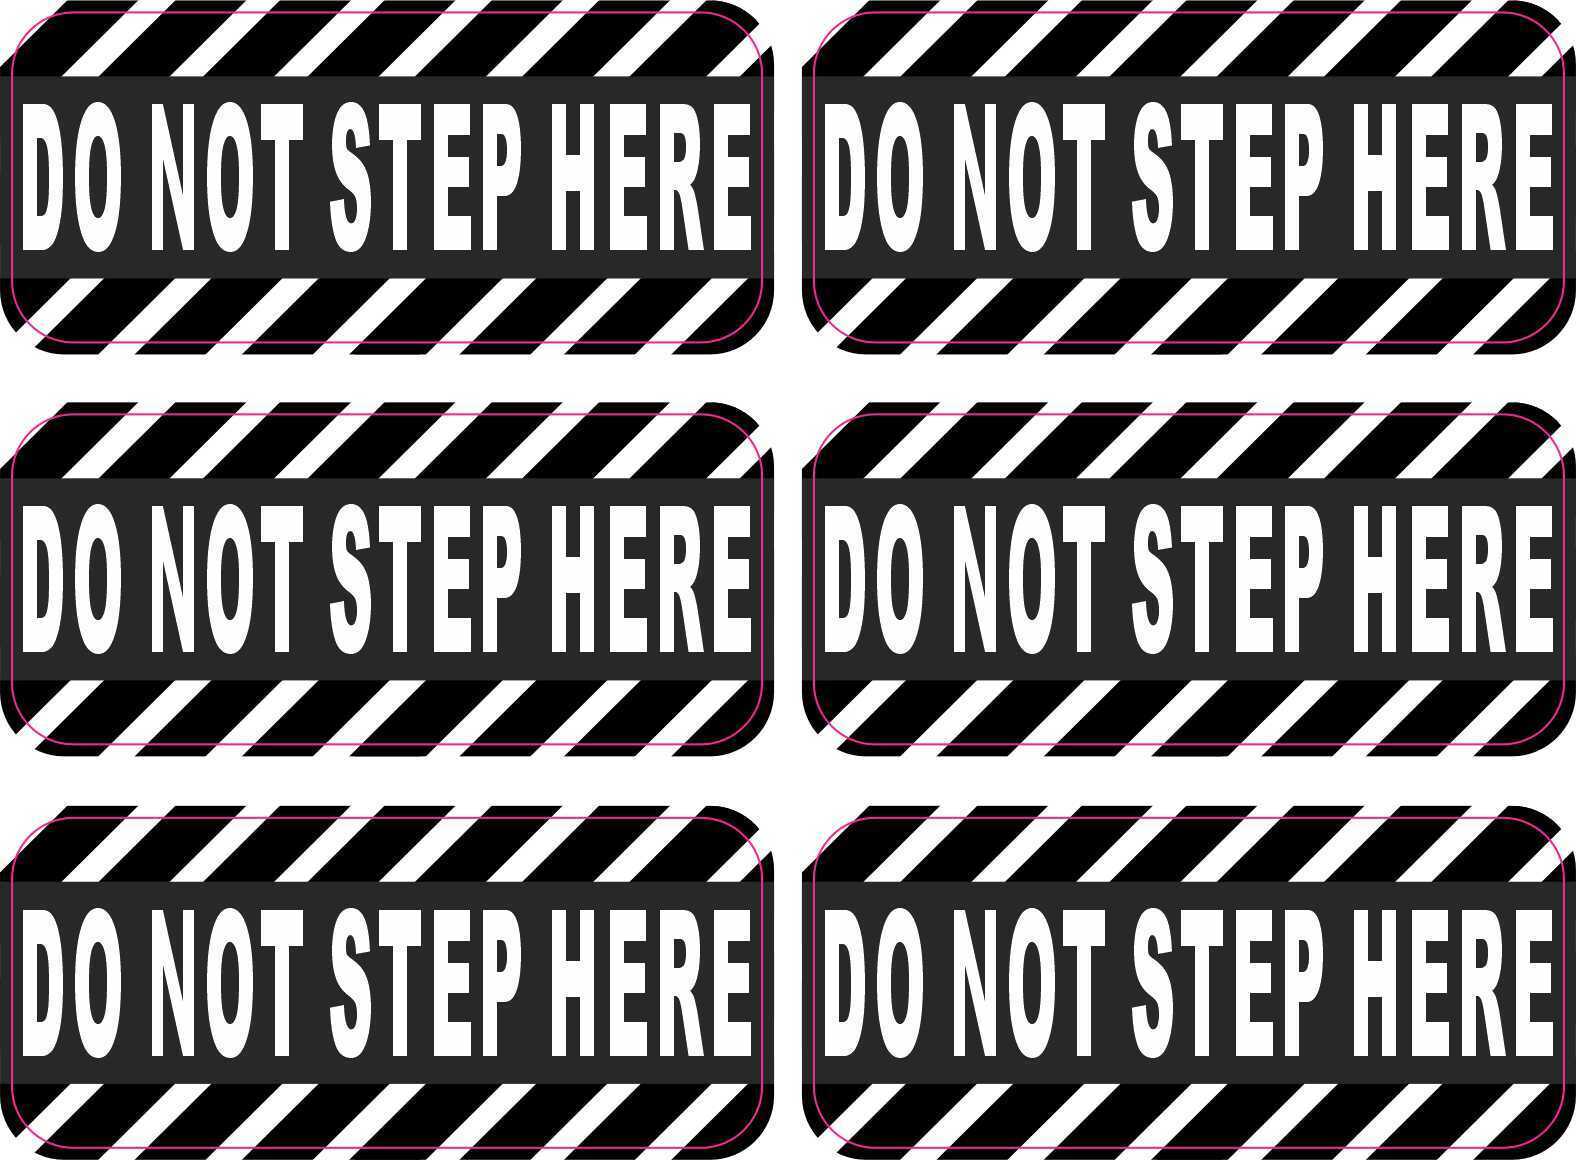 2.5in x 1in Do Not Step Here Vinyl Stickers Car Truck Vehicle Bumper Decals